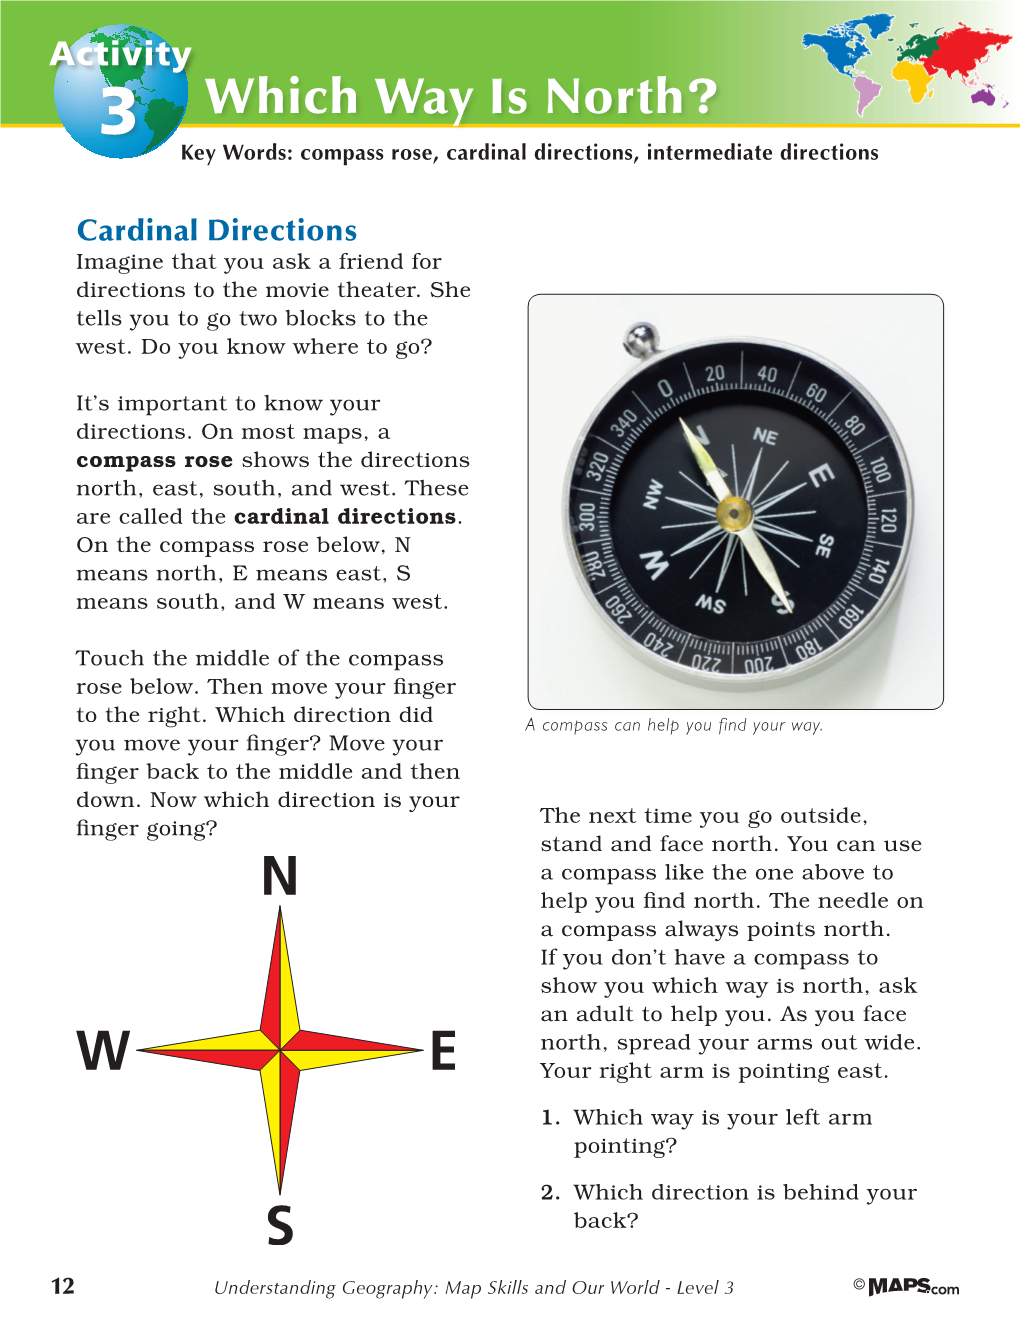 Which Way Is North? Key Words: Compass Rose, Cardinal Directions, Intermediate Directions